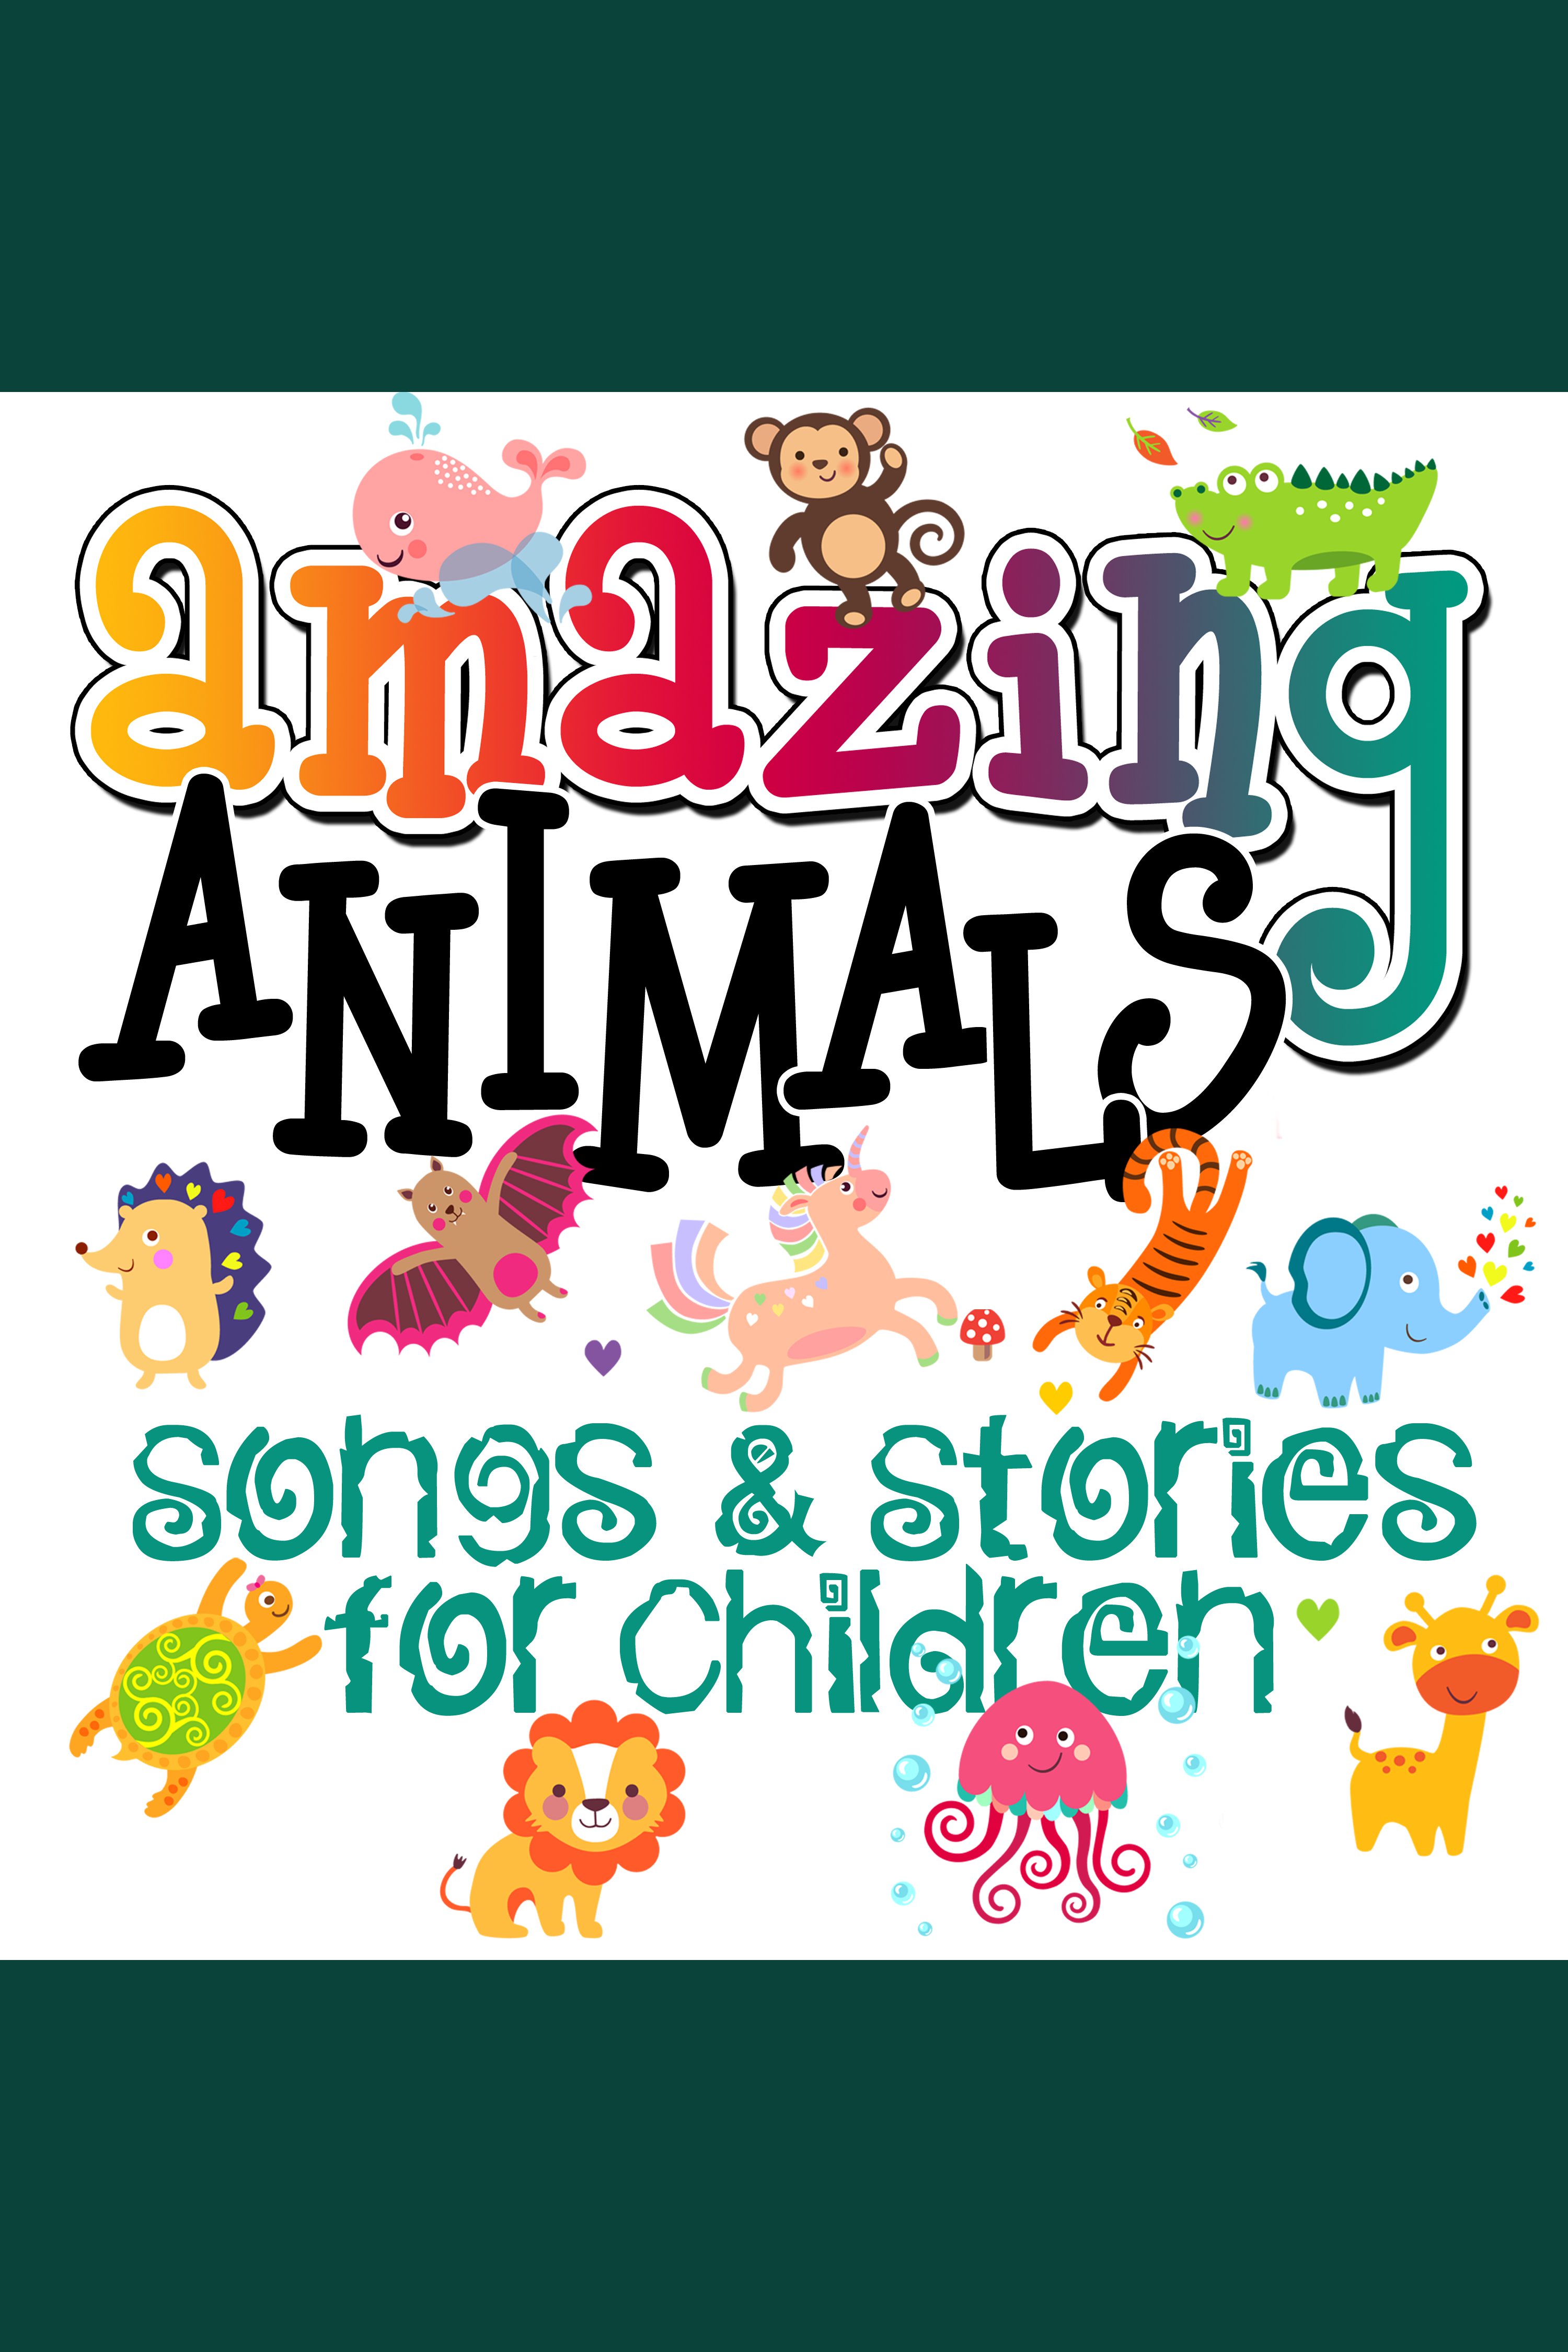 Amazing Animals! Songs & Stories for Children cover image